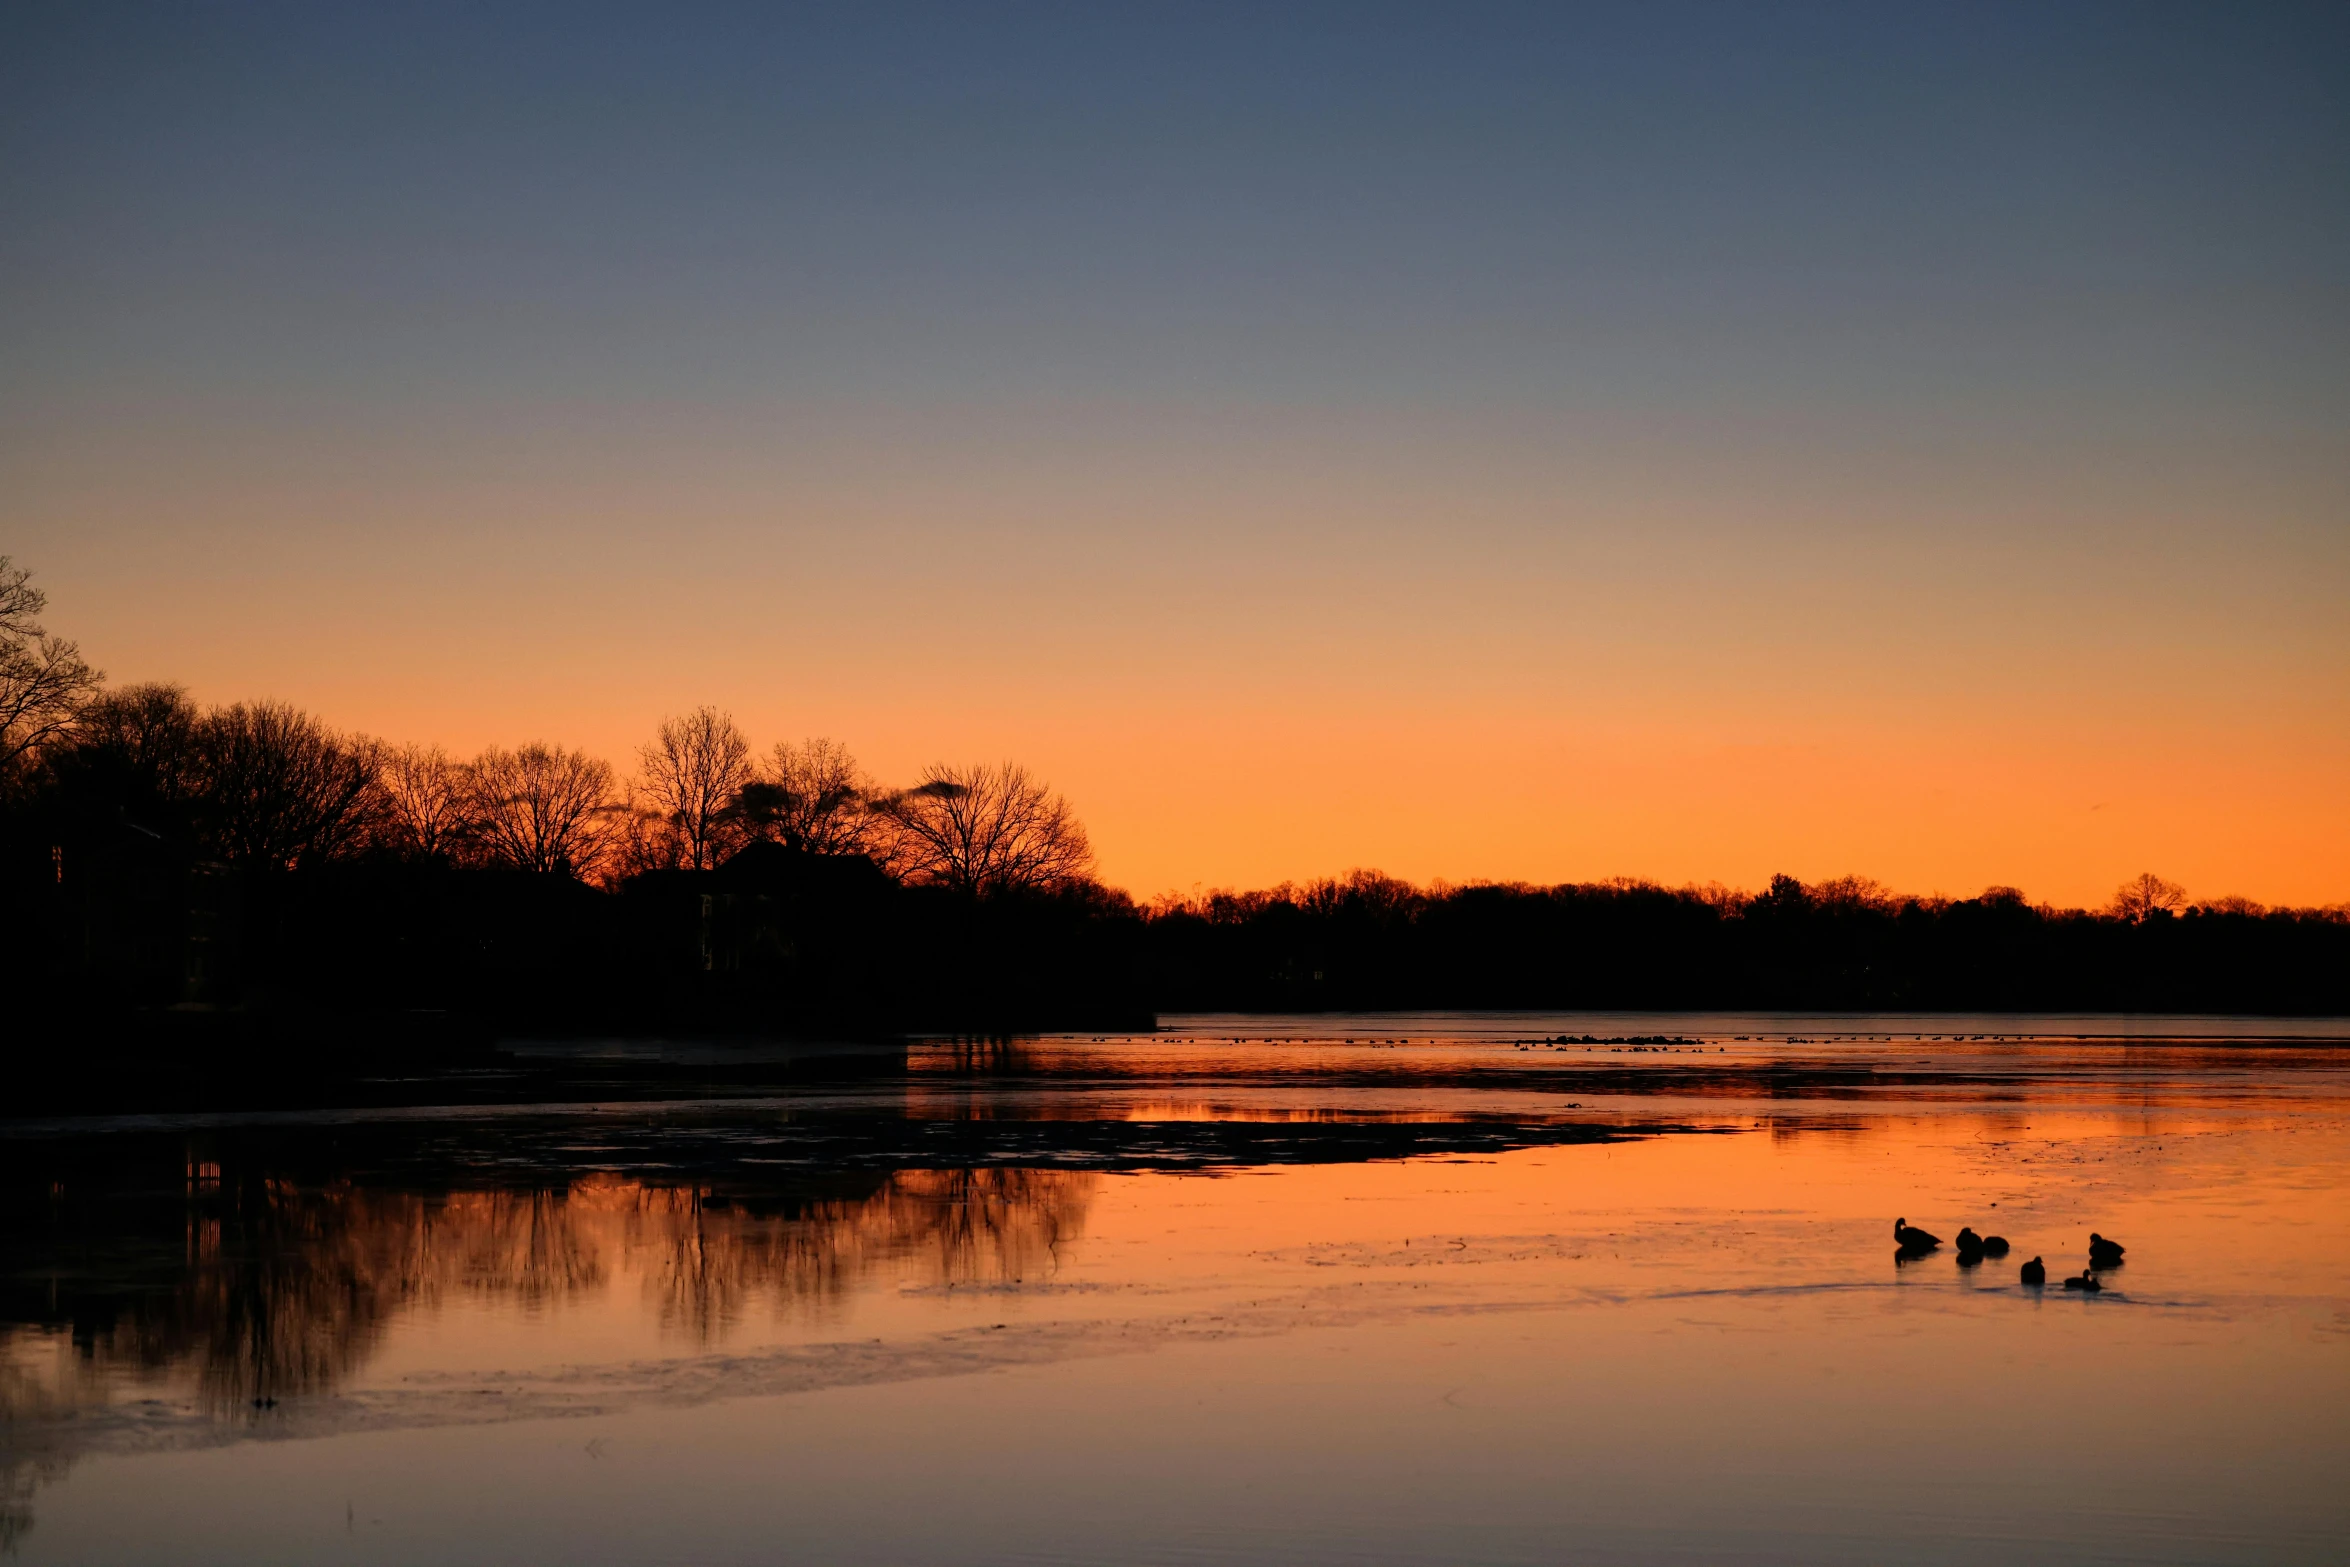 several ducks walking on the water at sunset